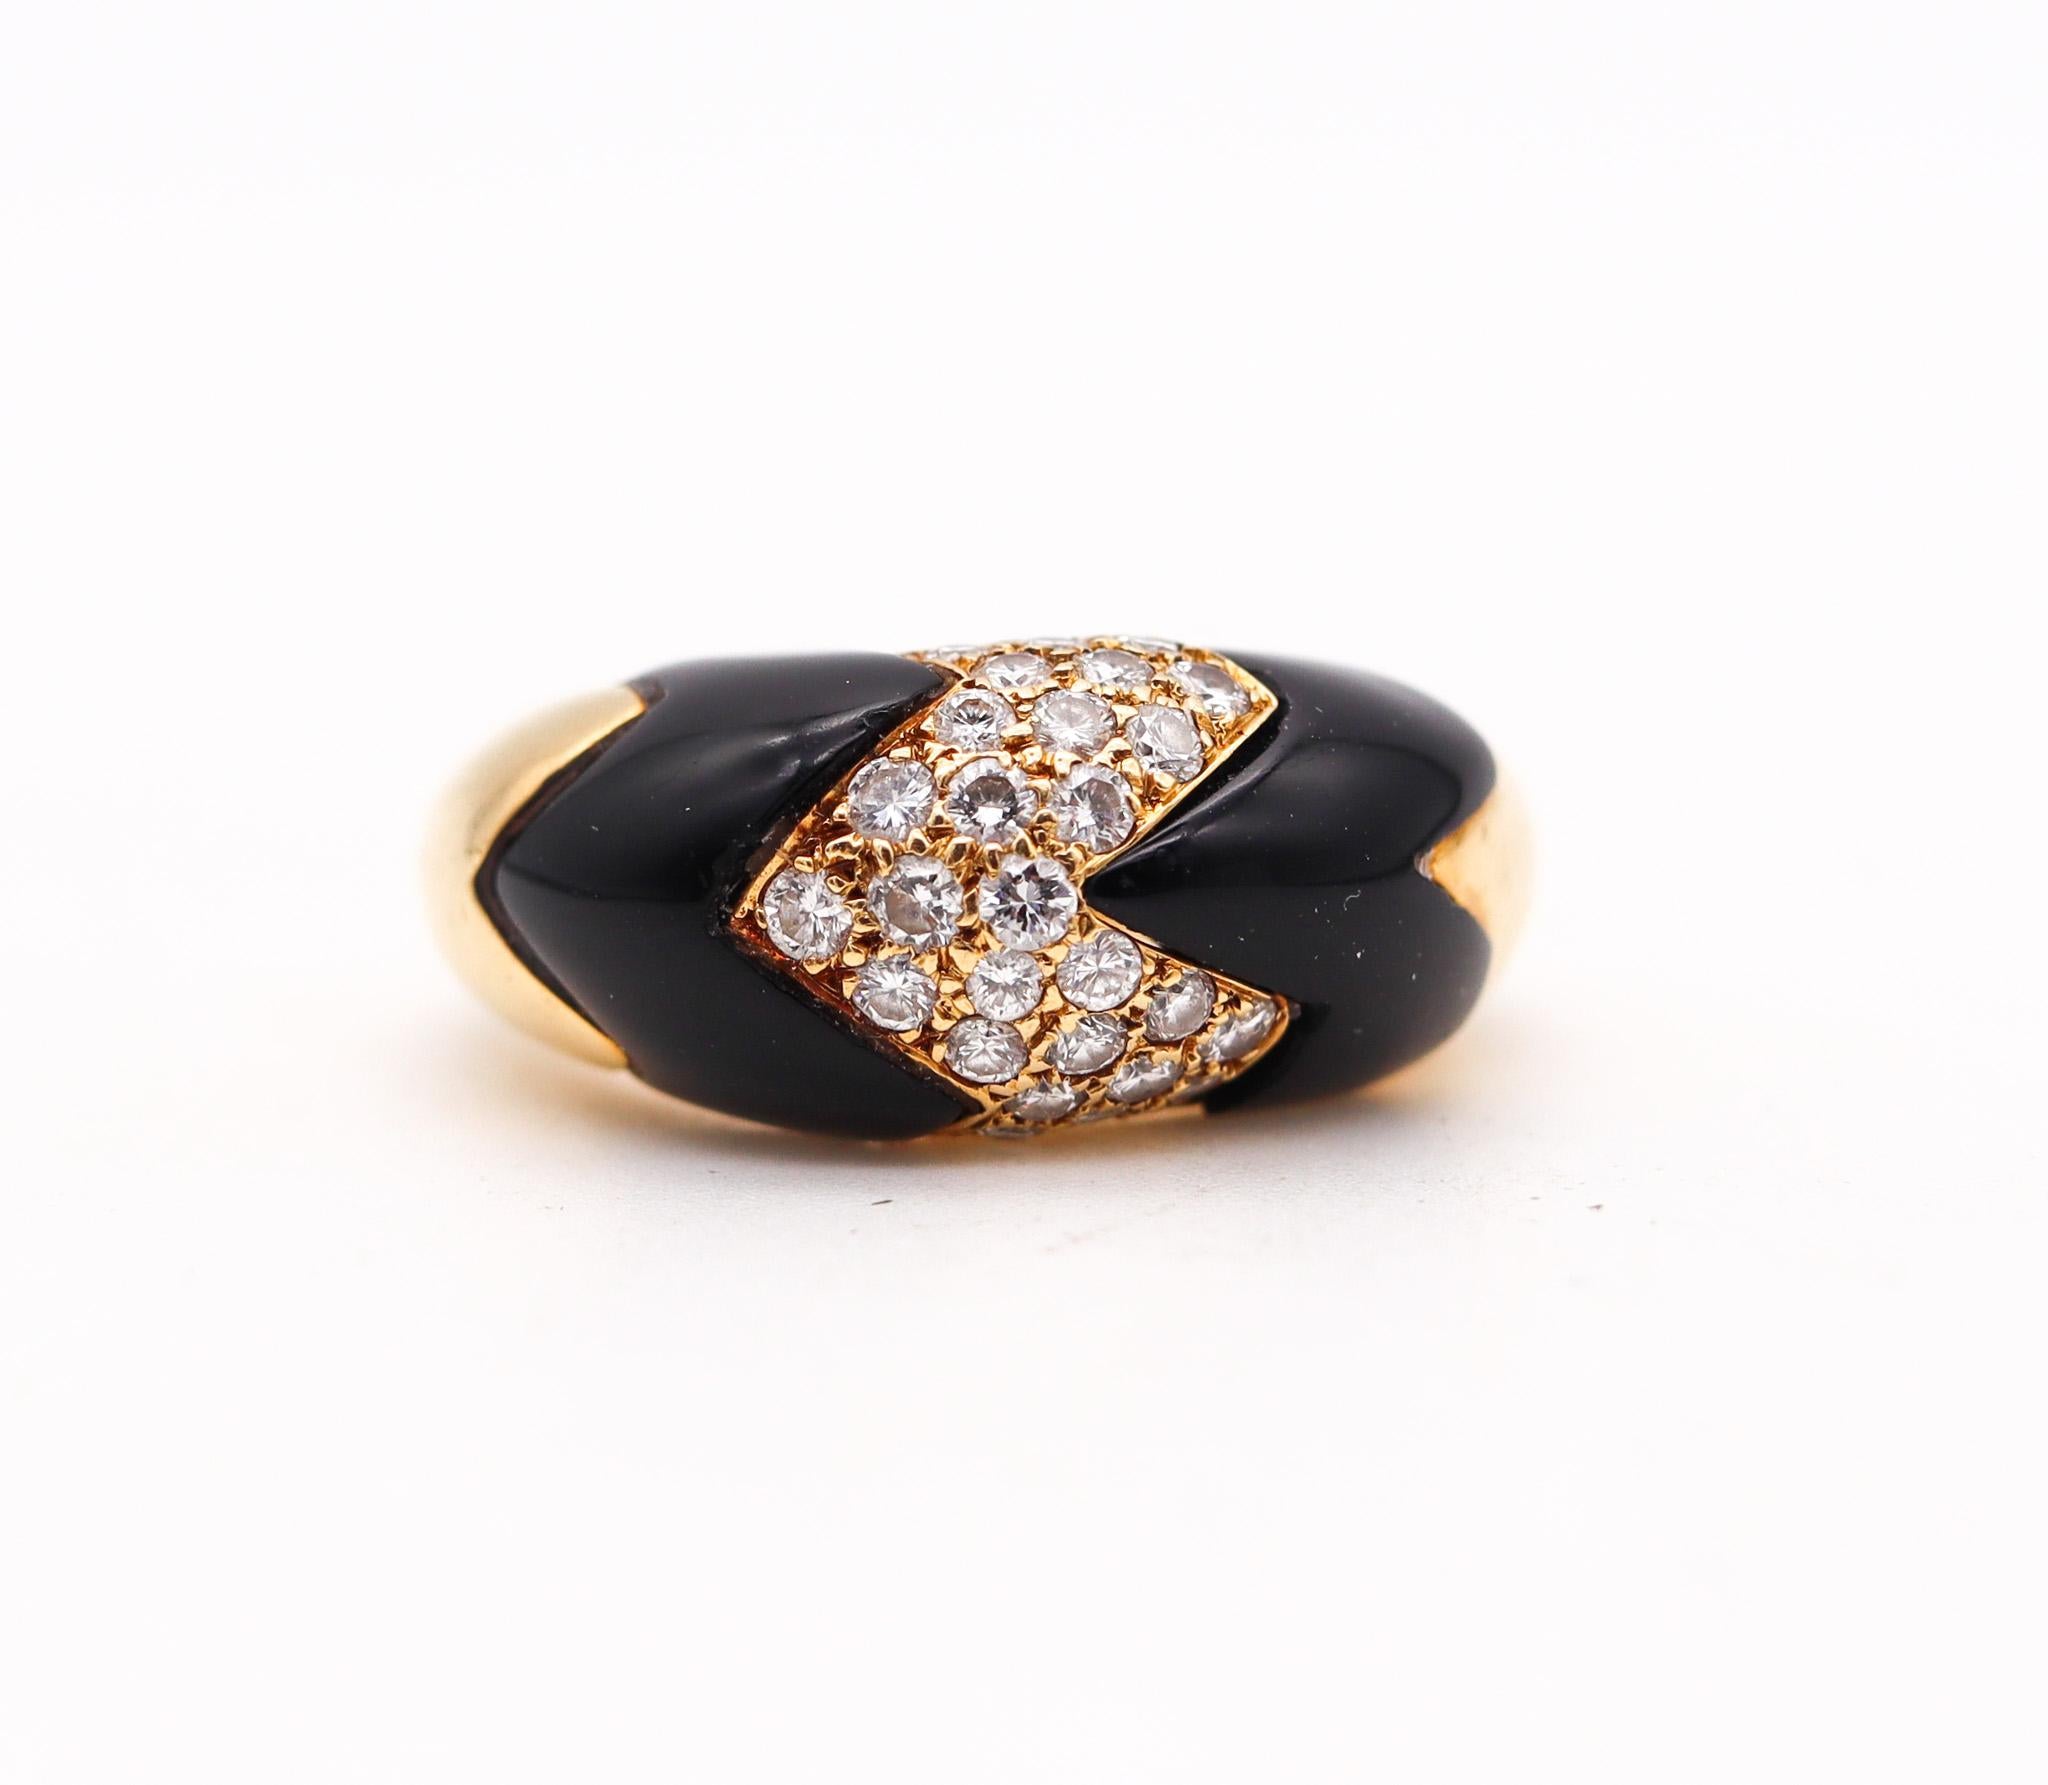 Gem set onyx ring designed by Van Cleef & Arpels.

Beautiful vintage ring, made in Paris France by the jewelry house of Van Cleef & Arpels, back in the 1970. This ring has been crafted with geometric patterns in solid yellow gold of 18 karats, with